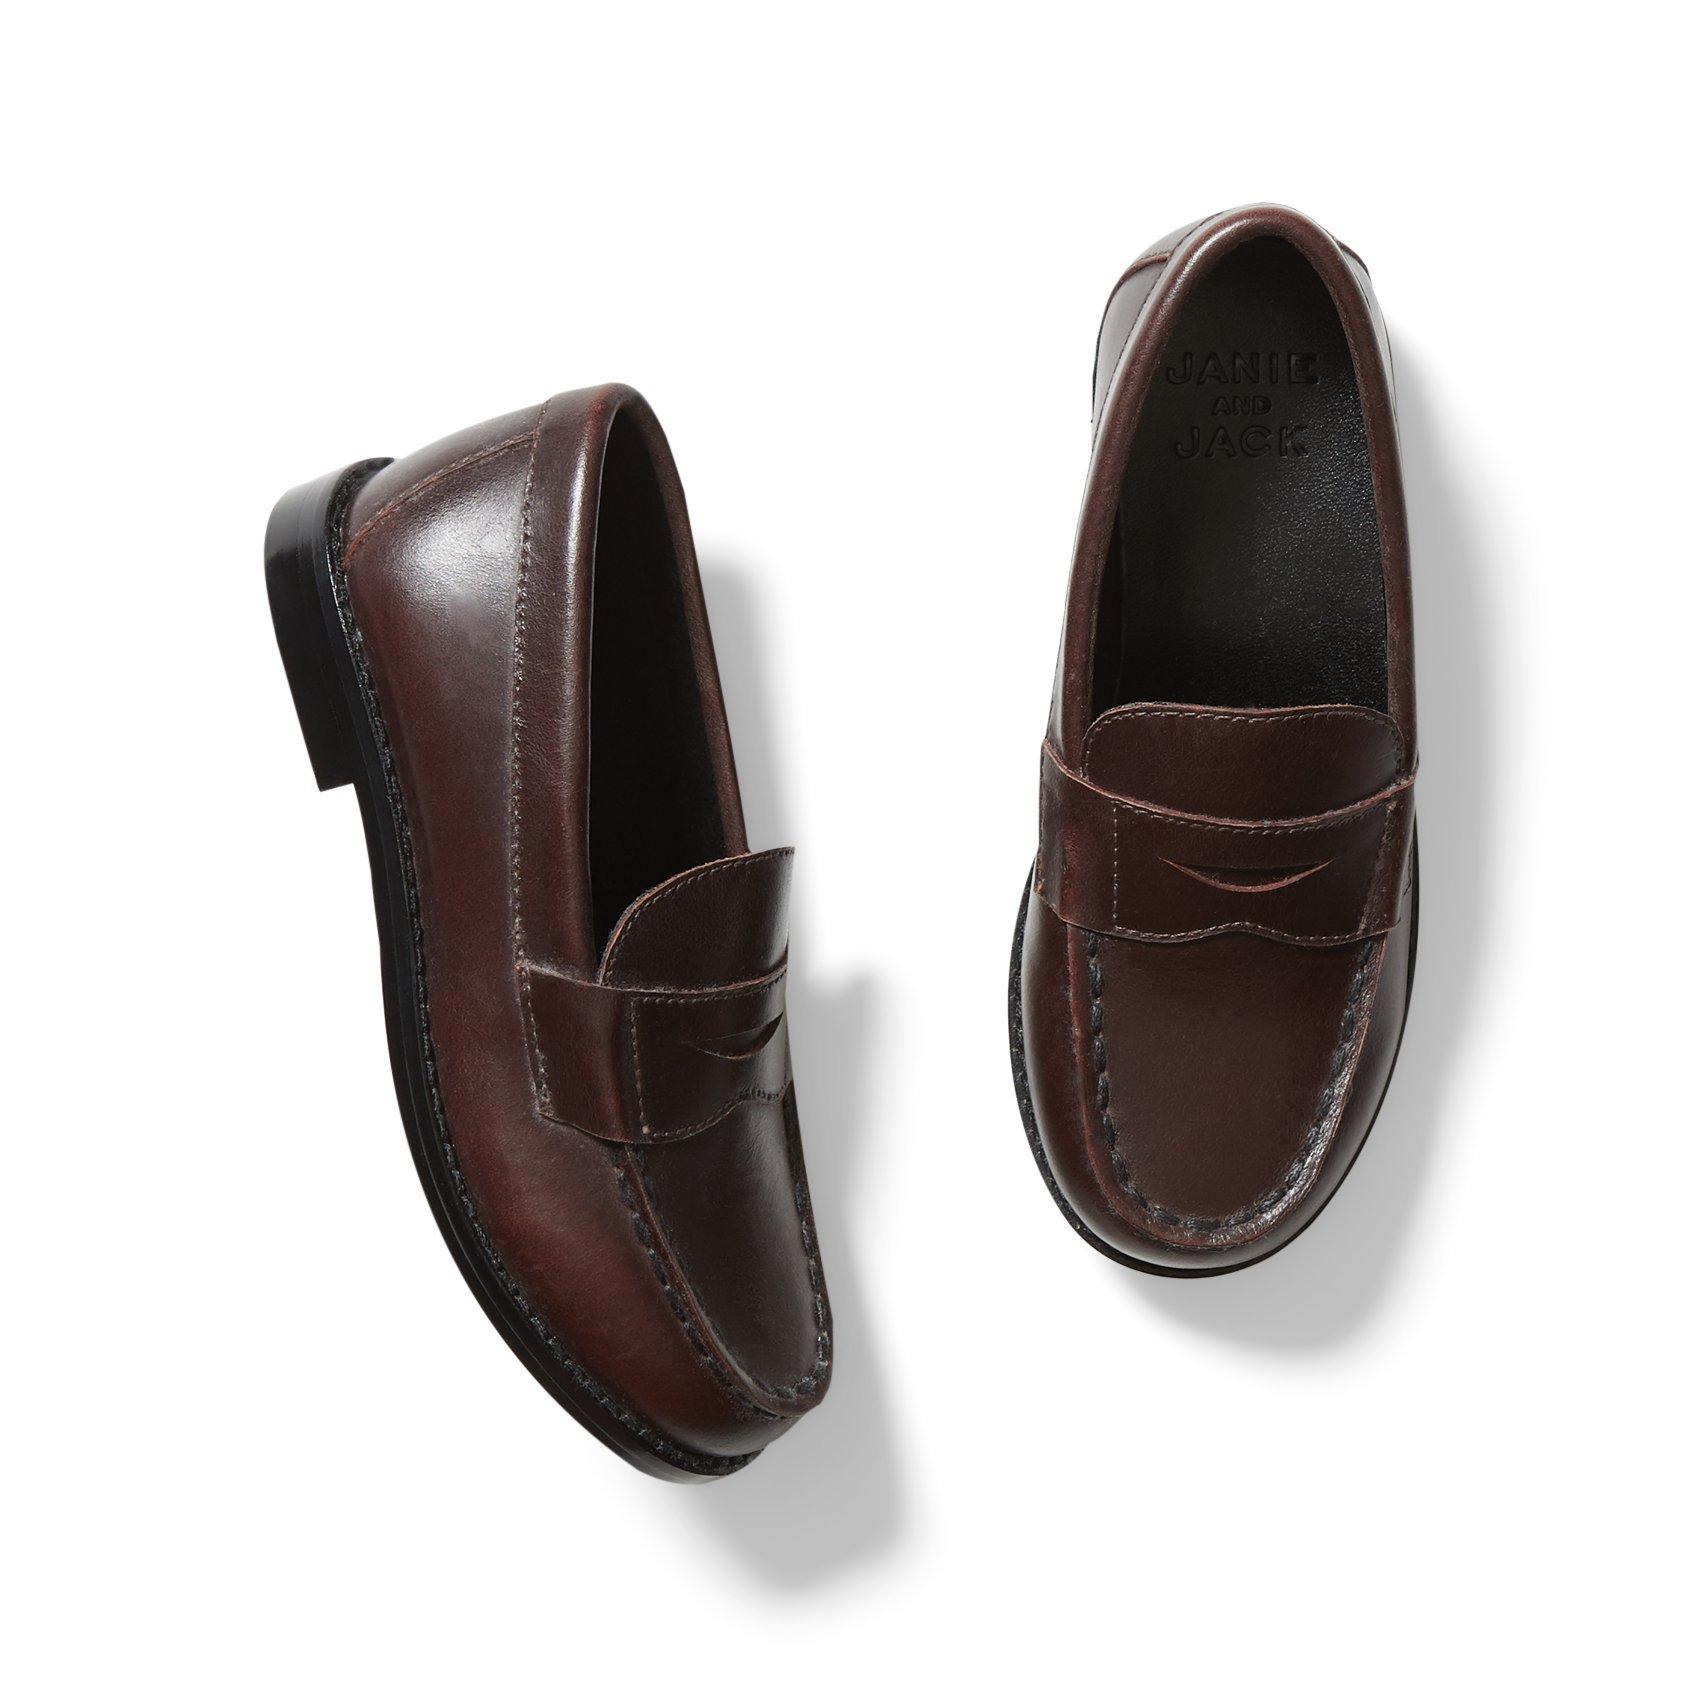 Boy Cocoa Leather Penny Loafer by Janie and Jack